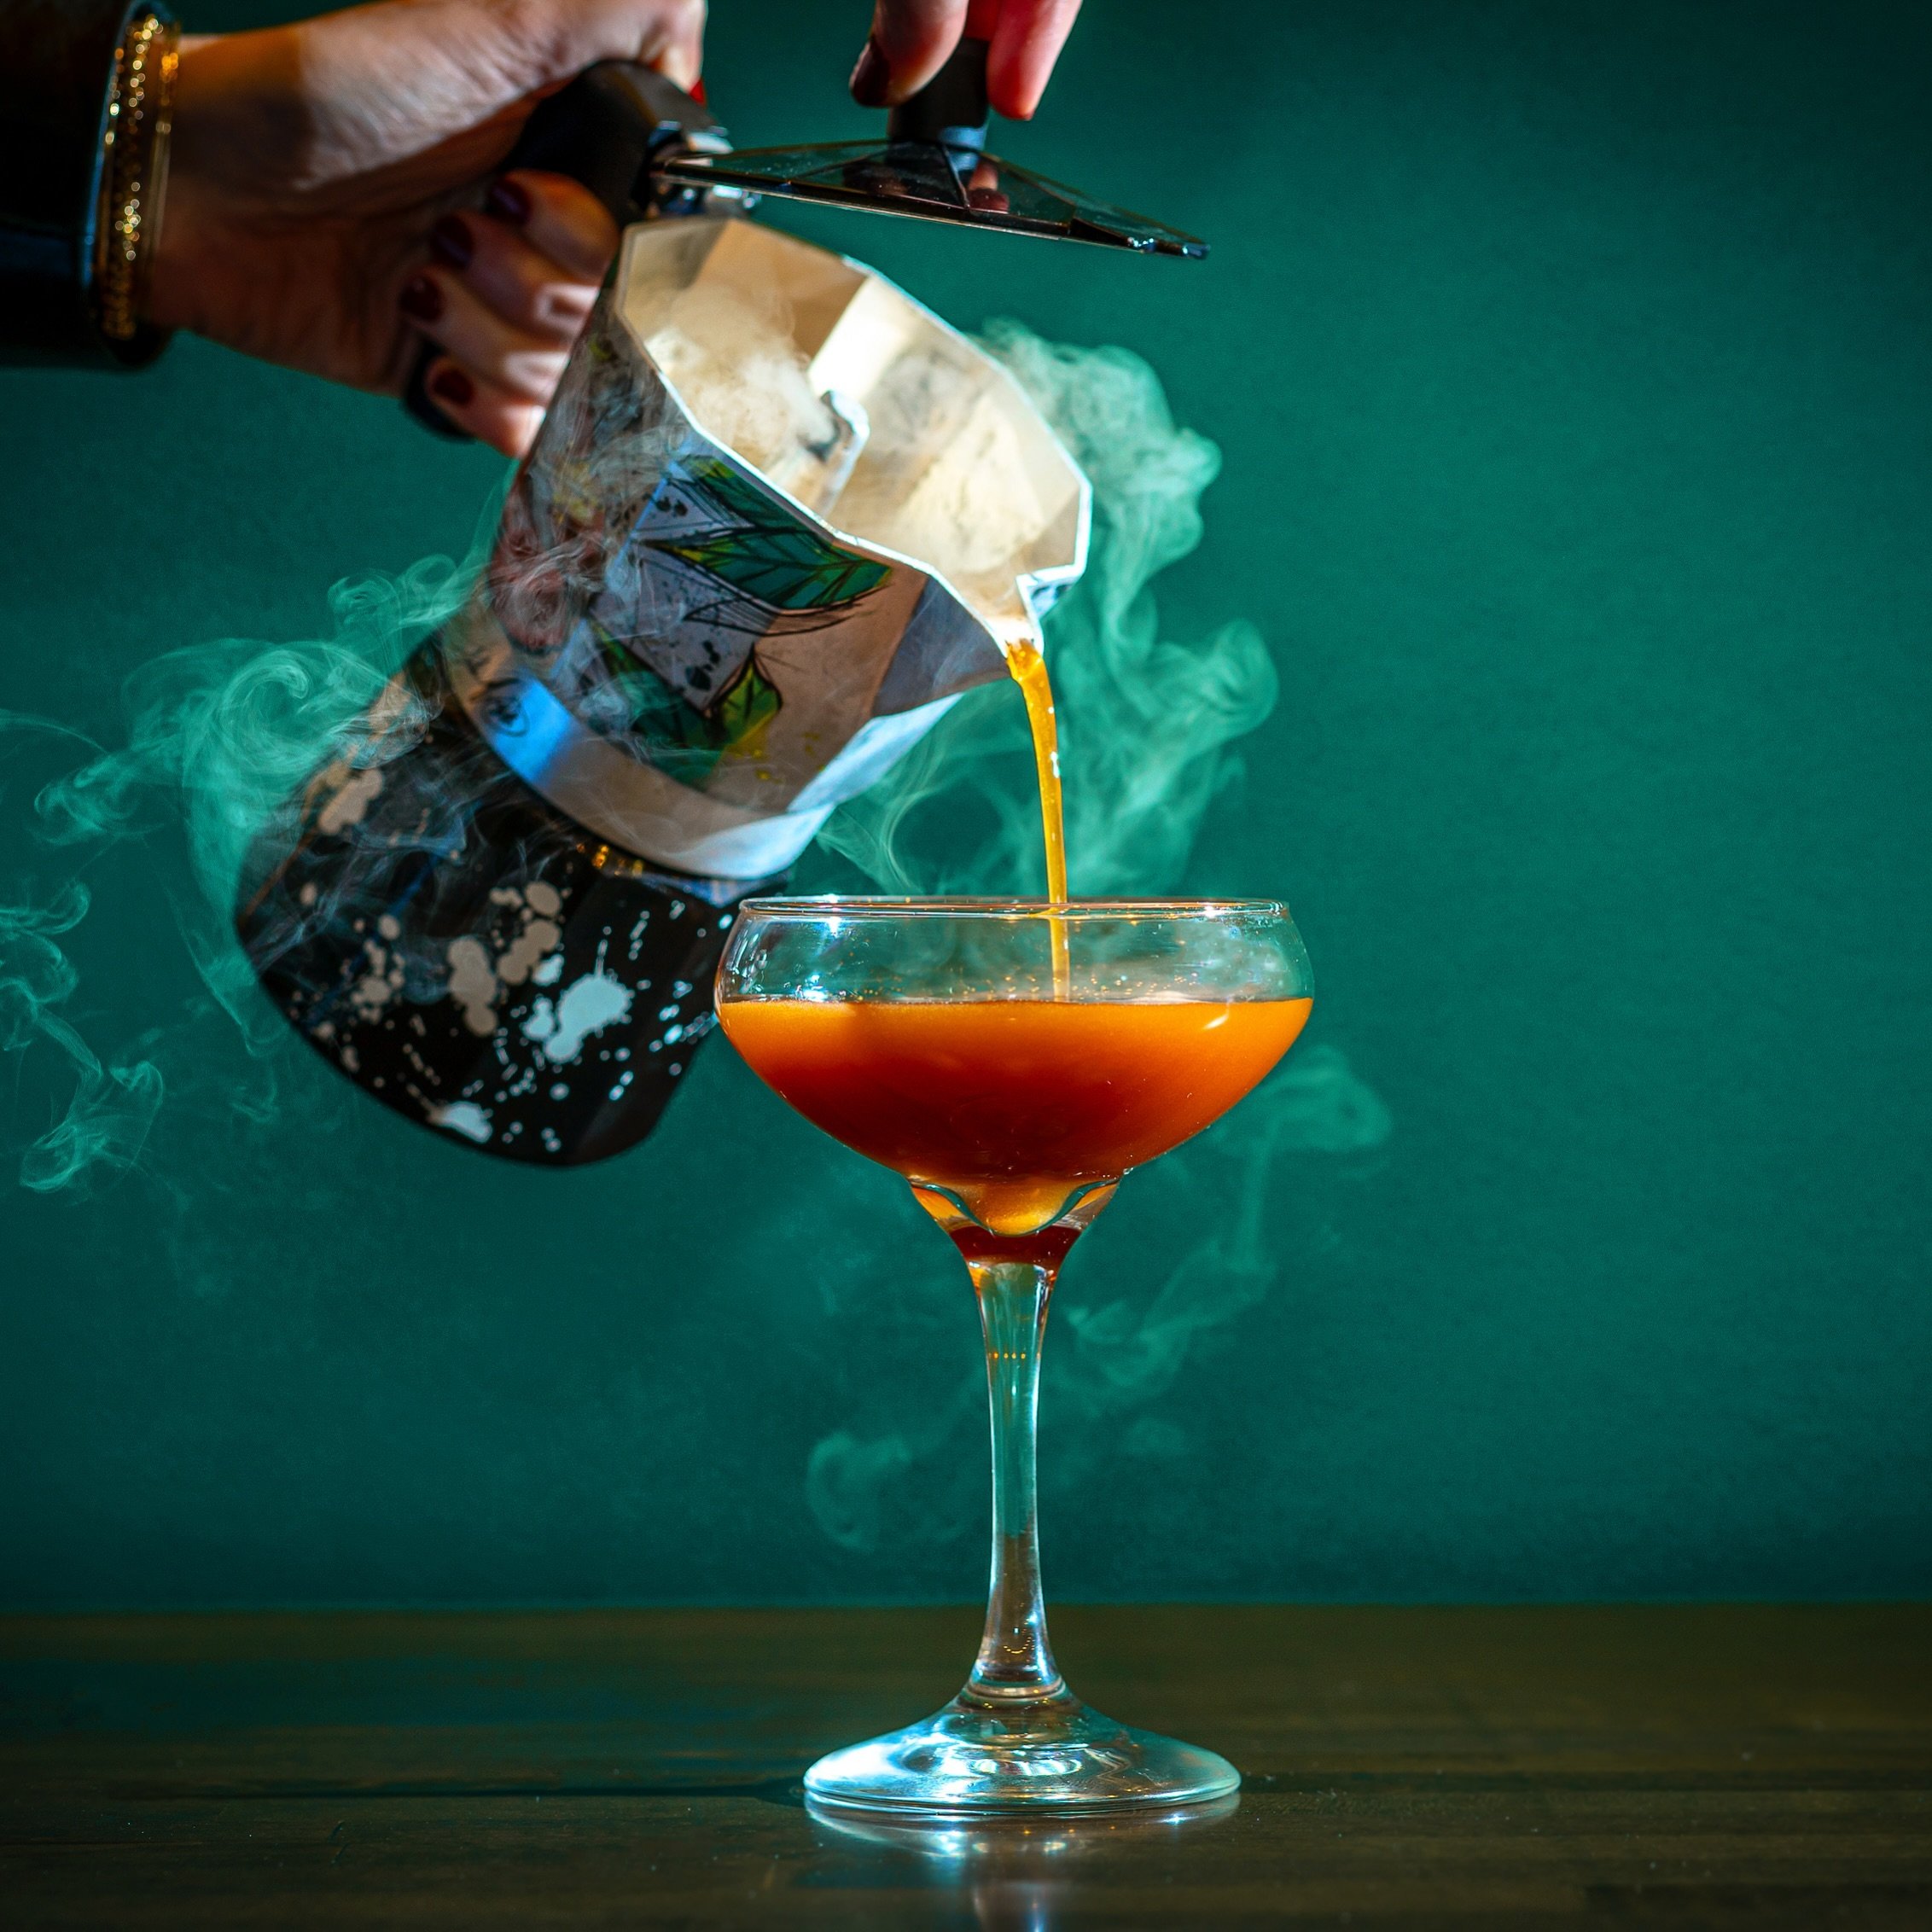 Steamy sips ahead! Our &lsquo;Chery&rsquo; Espresso Martini is here to ignite your night, served in a traditional Latin greca with enchanting smoke. 🔥☕️ #SmokeySensation #ChicaAndTheDon